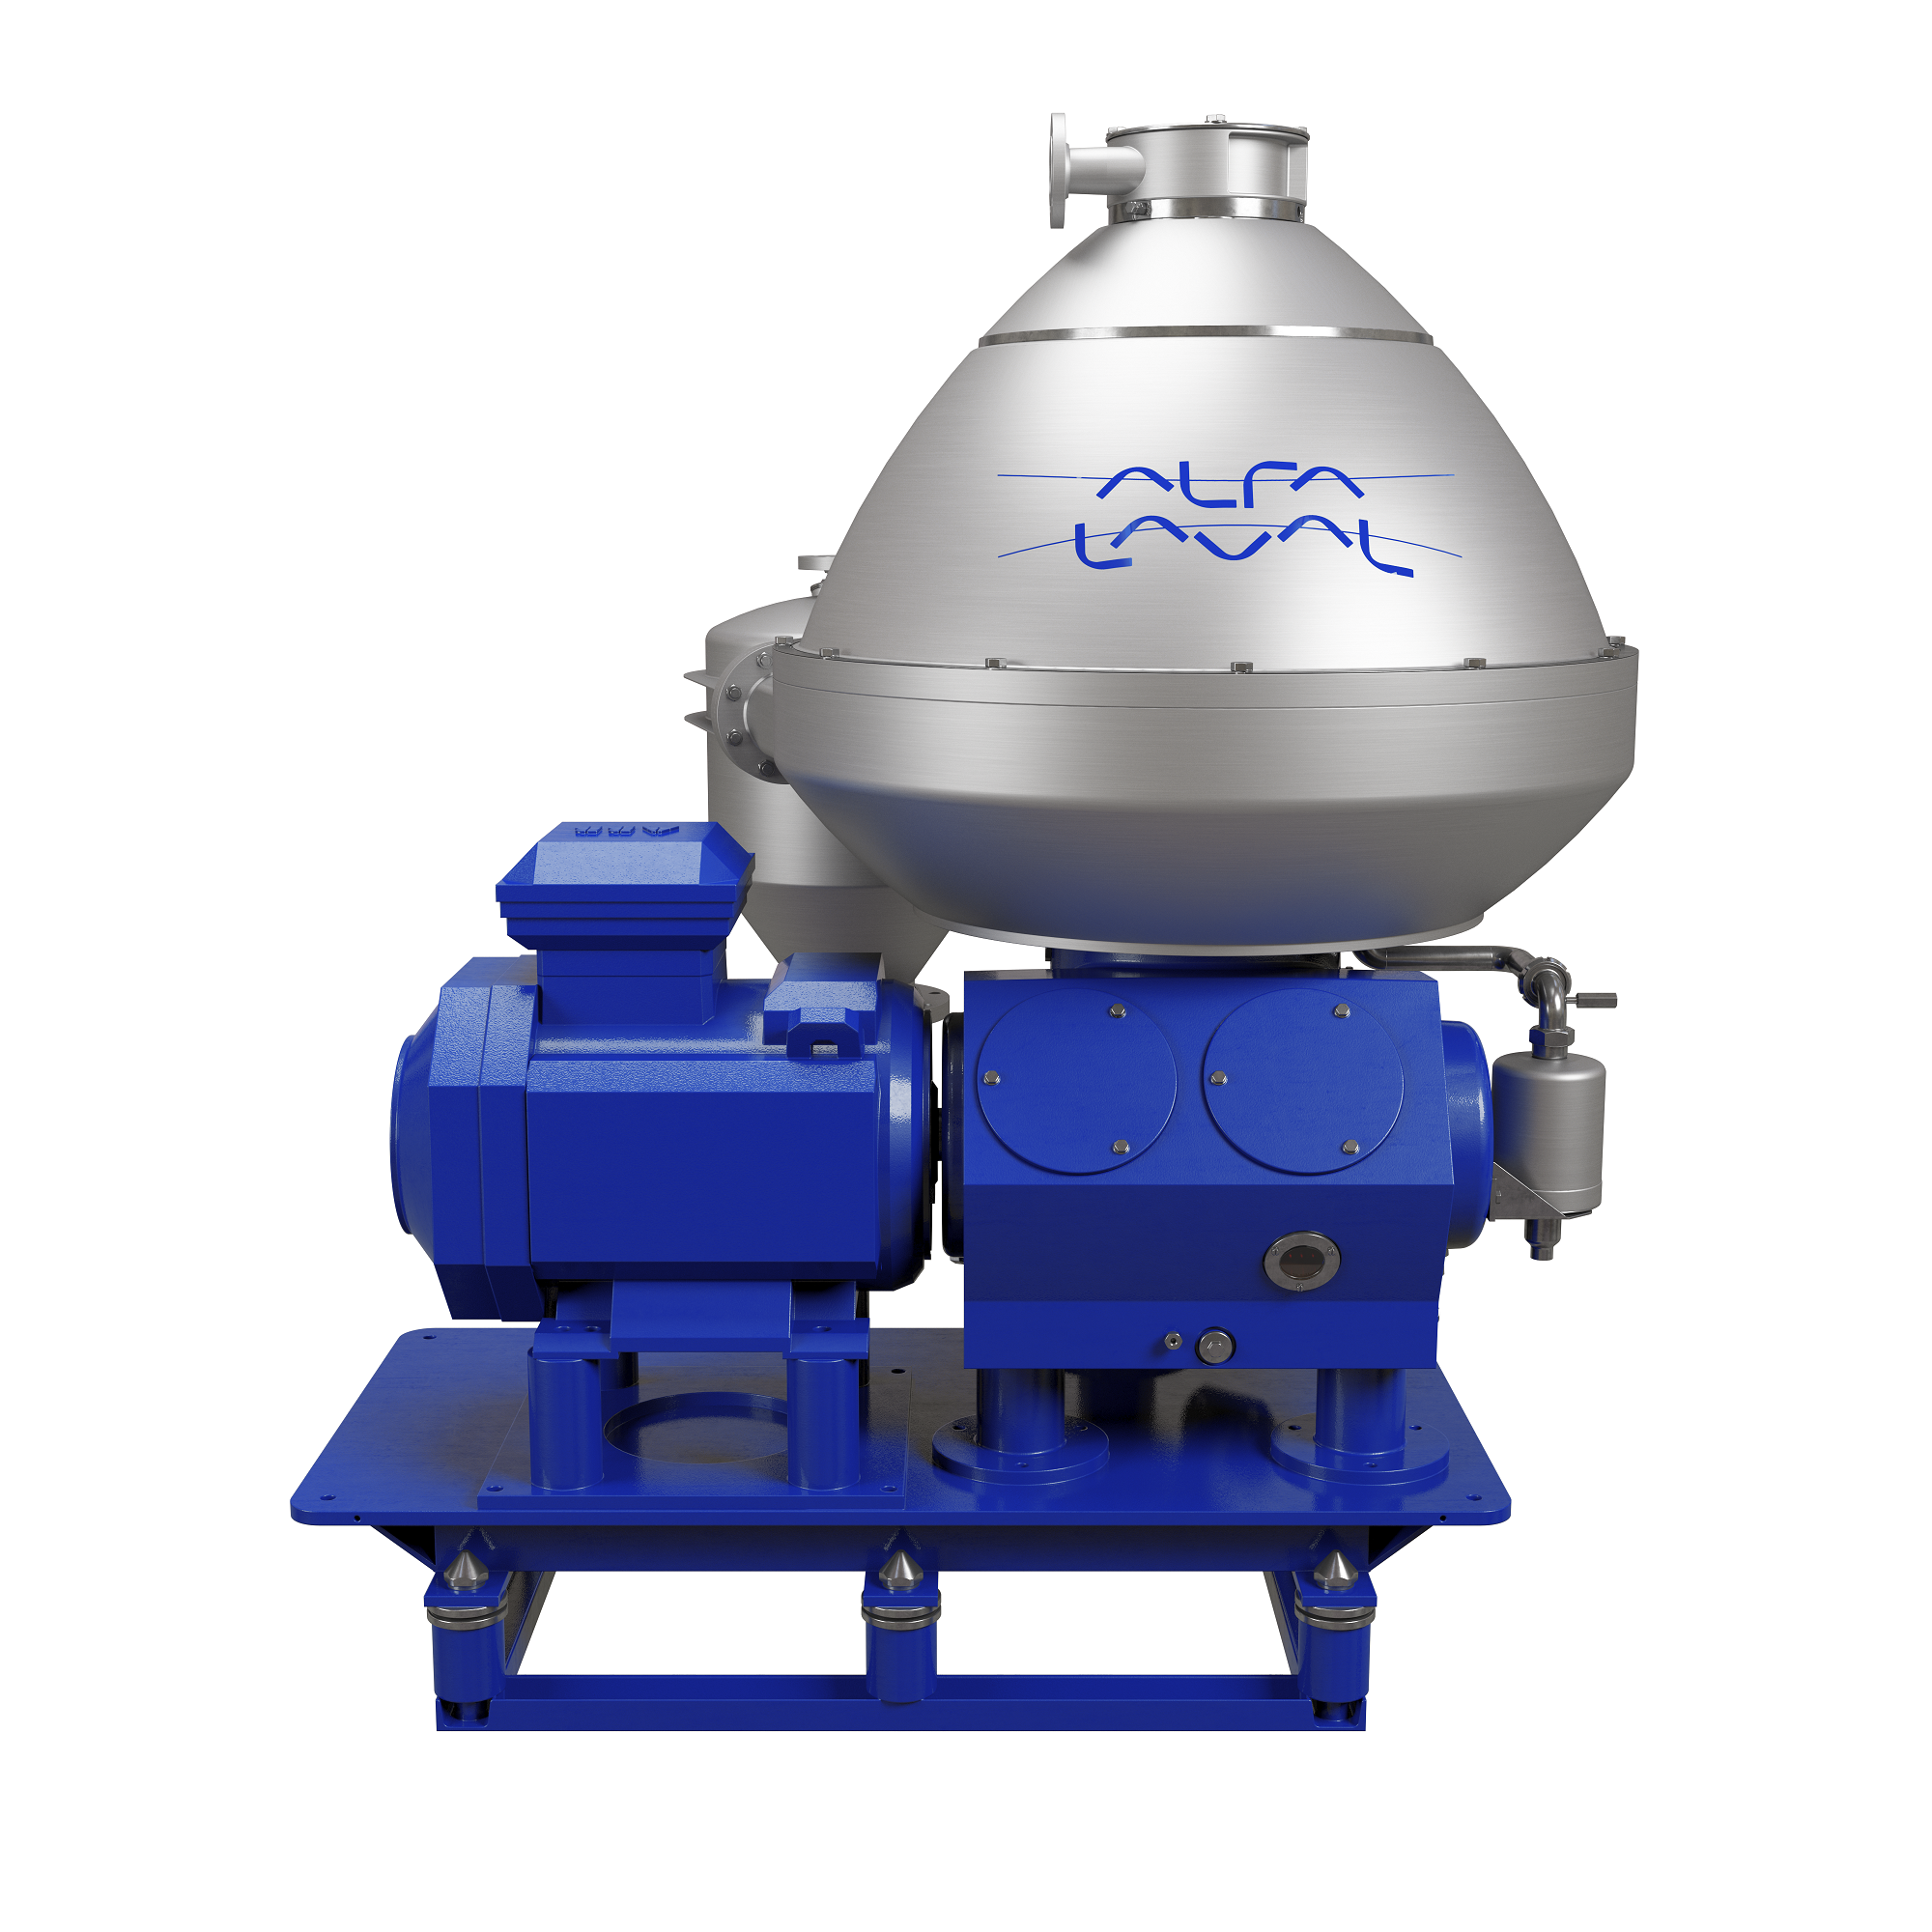 The Alfa Laval OF 900 has a centre-to-centre flow path and a hermetic design.